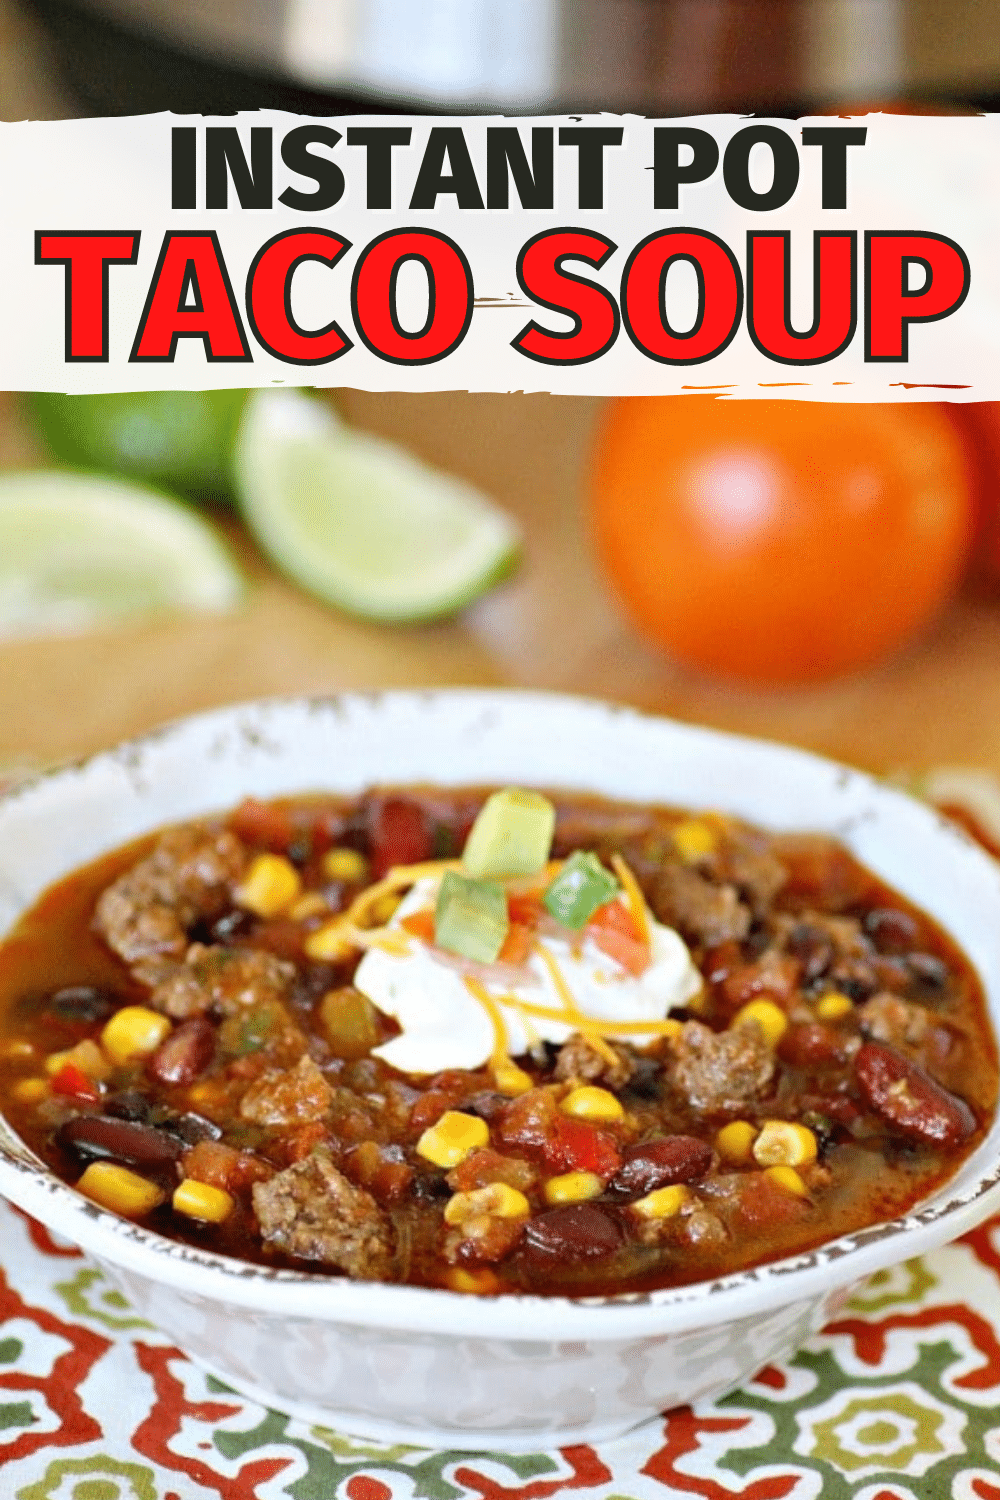 Instant Pot Taco Soup in a white bowl with slices of lime and tomatoes in the background